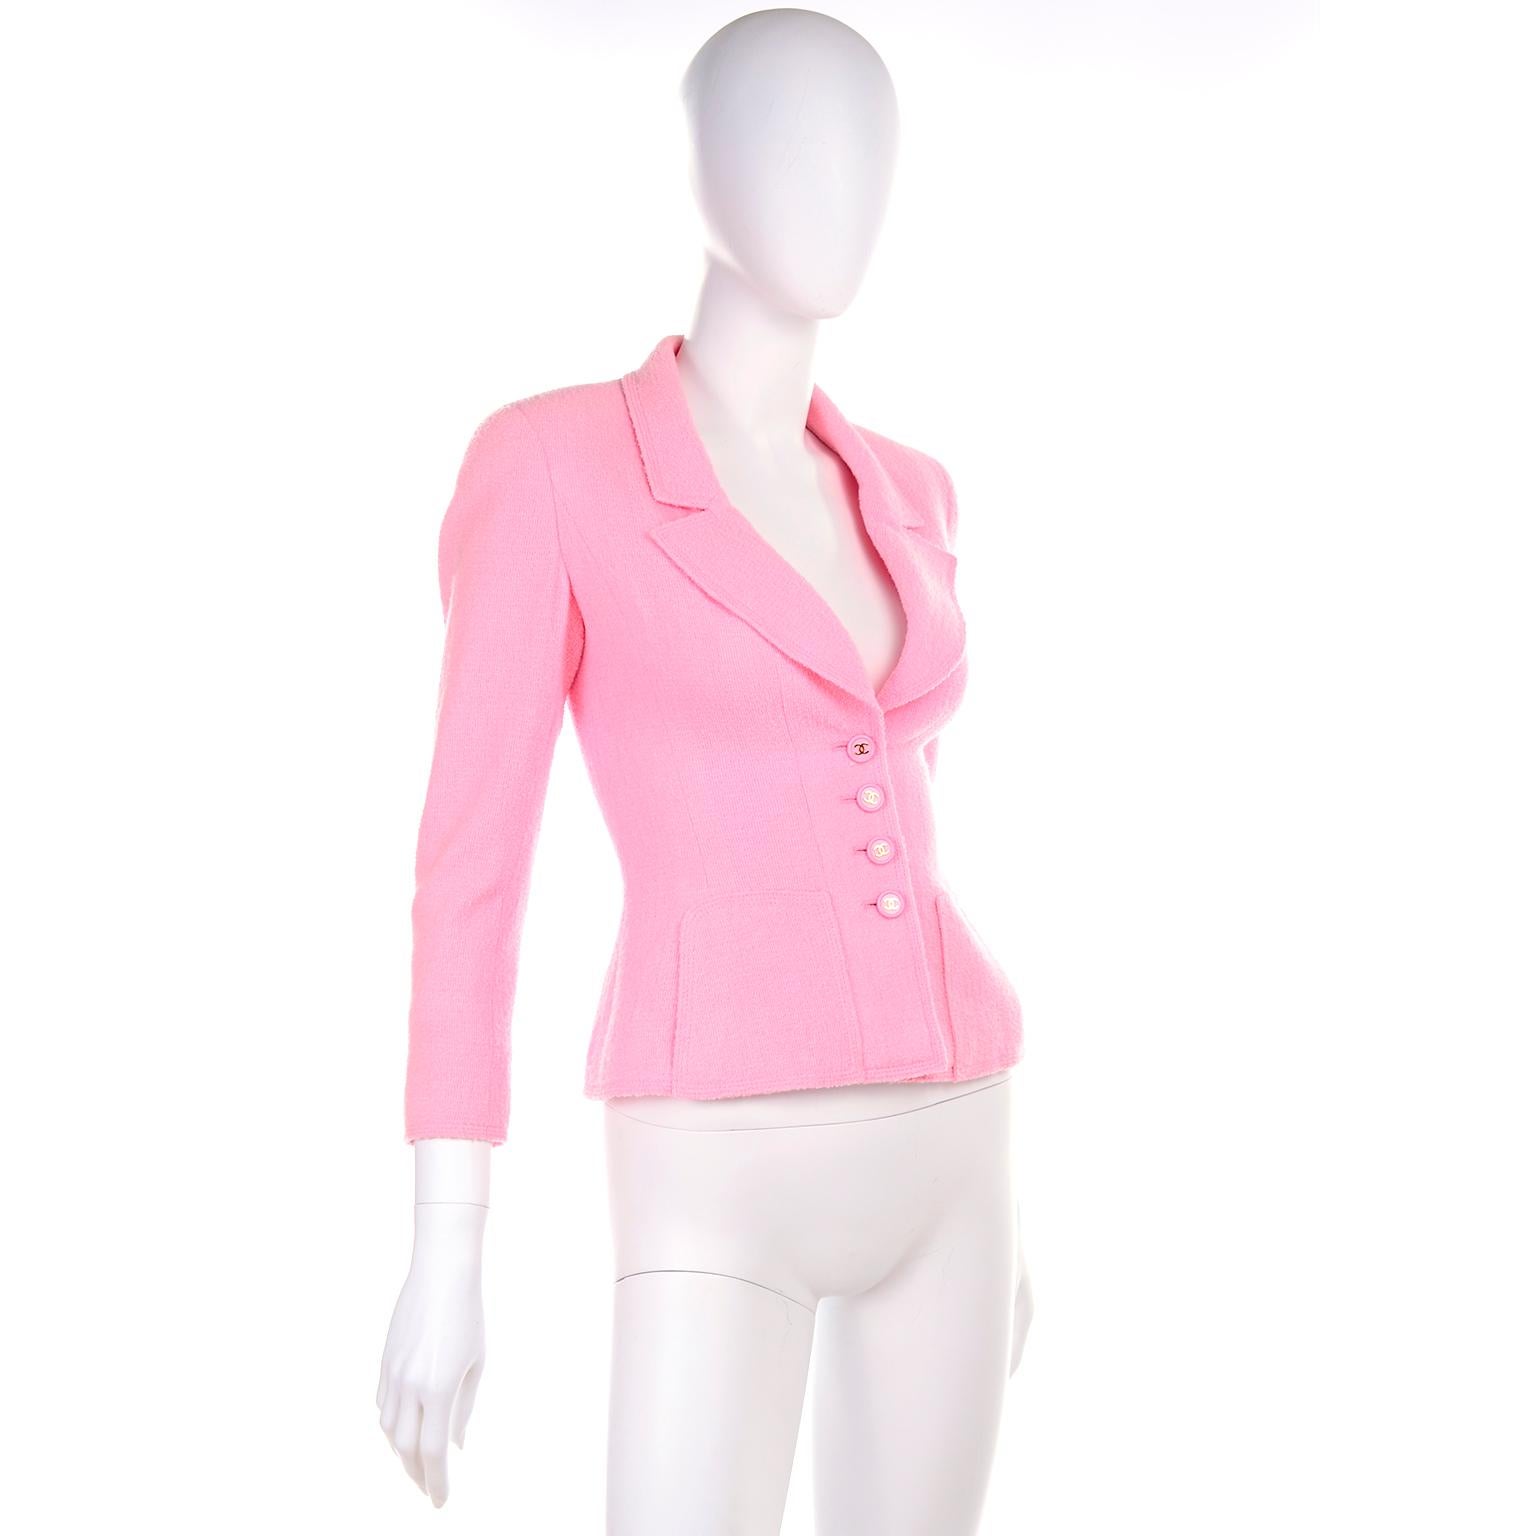 This beautiful vintage Chanel jacket is from the Spring Summer 1997 collection designed by Karl Lagerfeld.  The jacket has front side slit pockets, and zippers on the sleeves with CC Chanel monogram zipper pulls, Chanel pink marked buttons (4